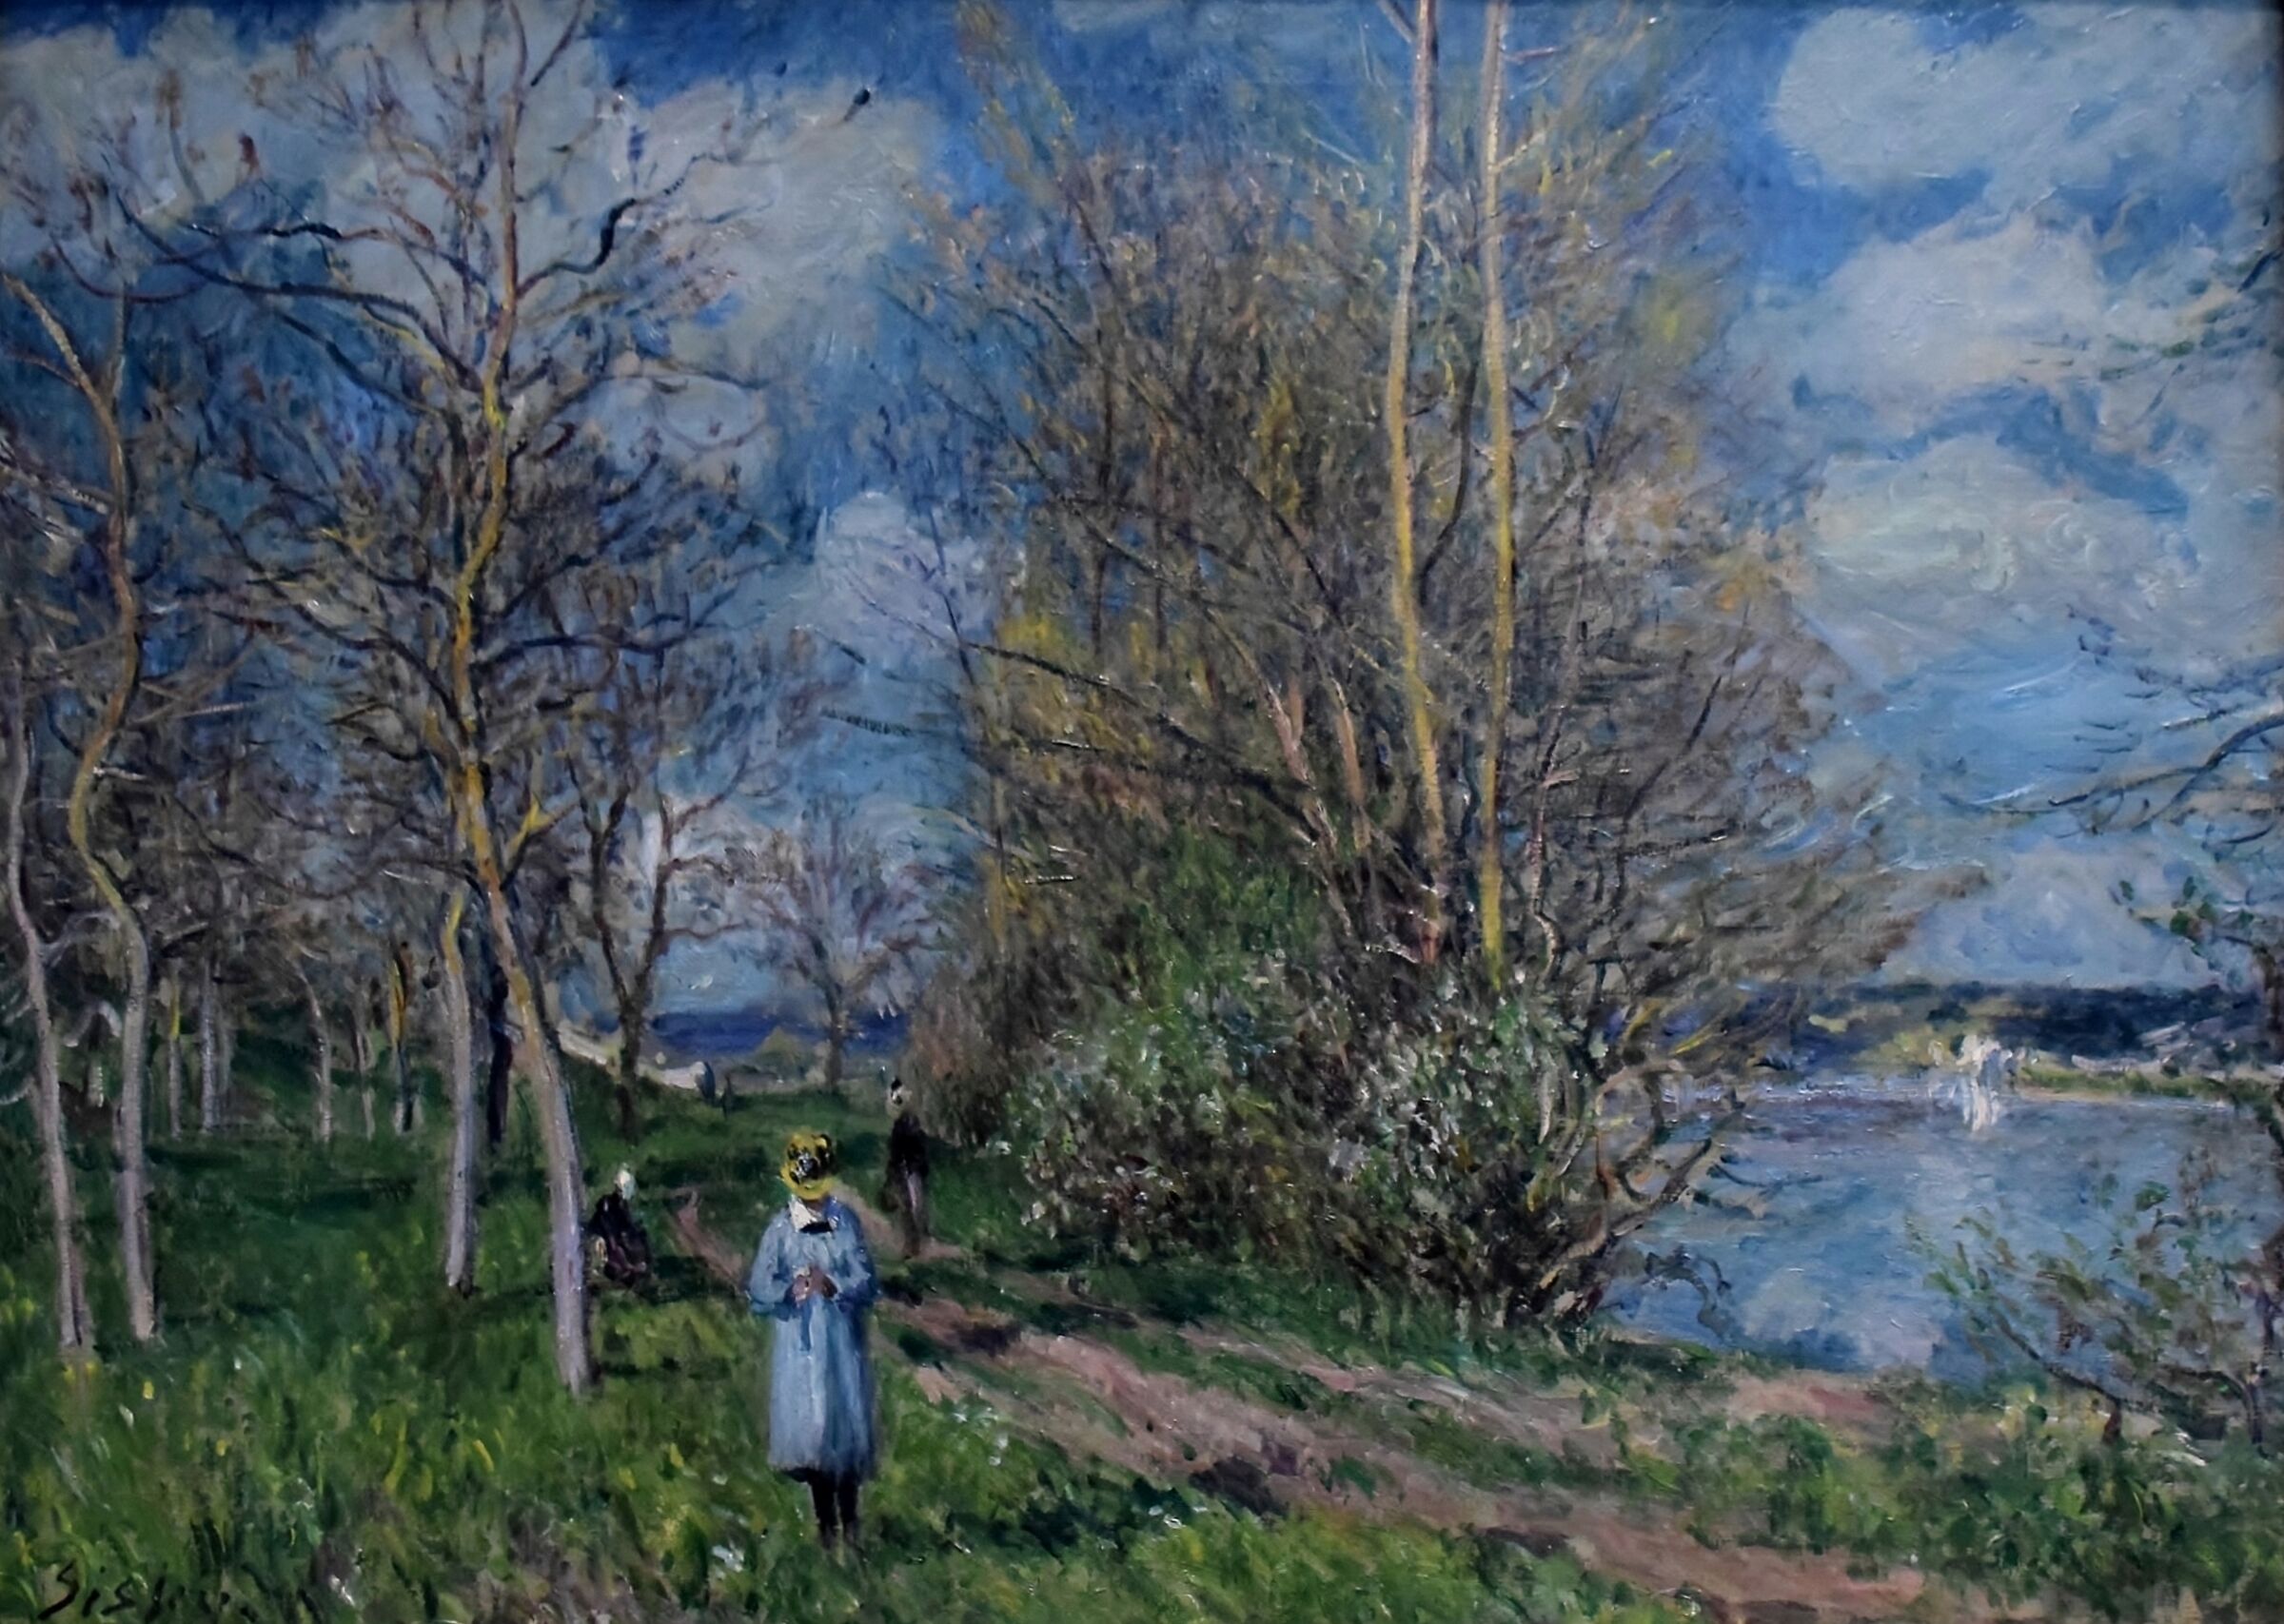 Alfred Sisley "Small Meadows of Spring" (c. 1881)...